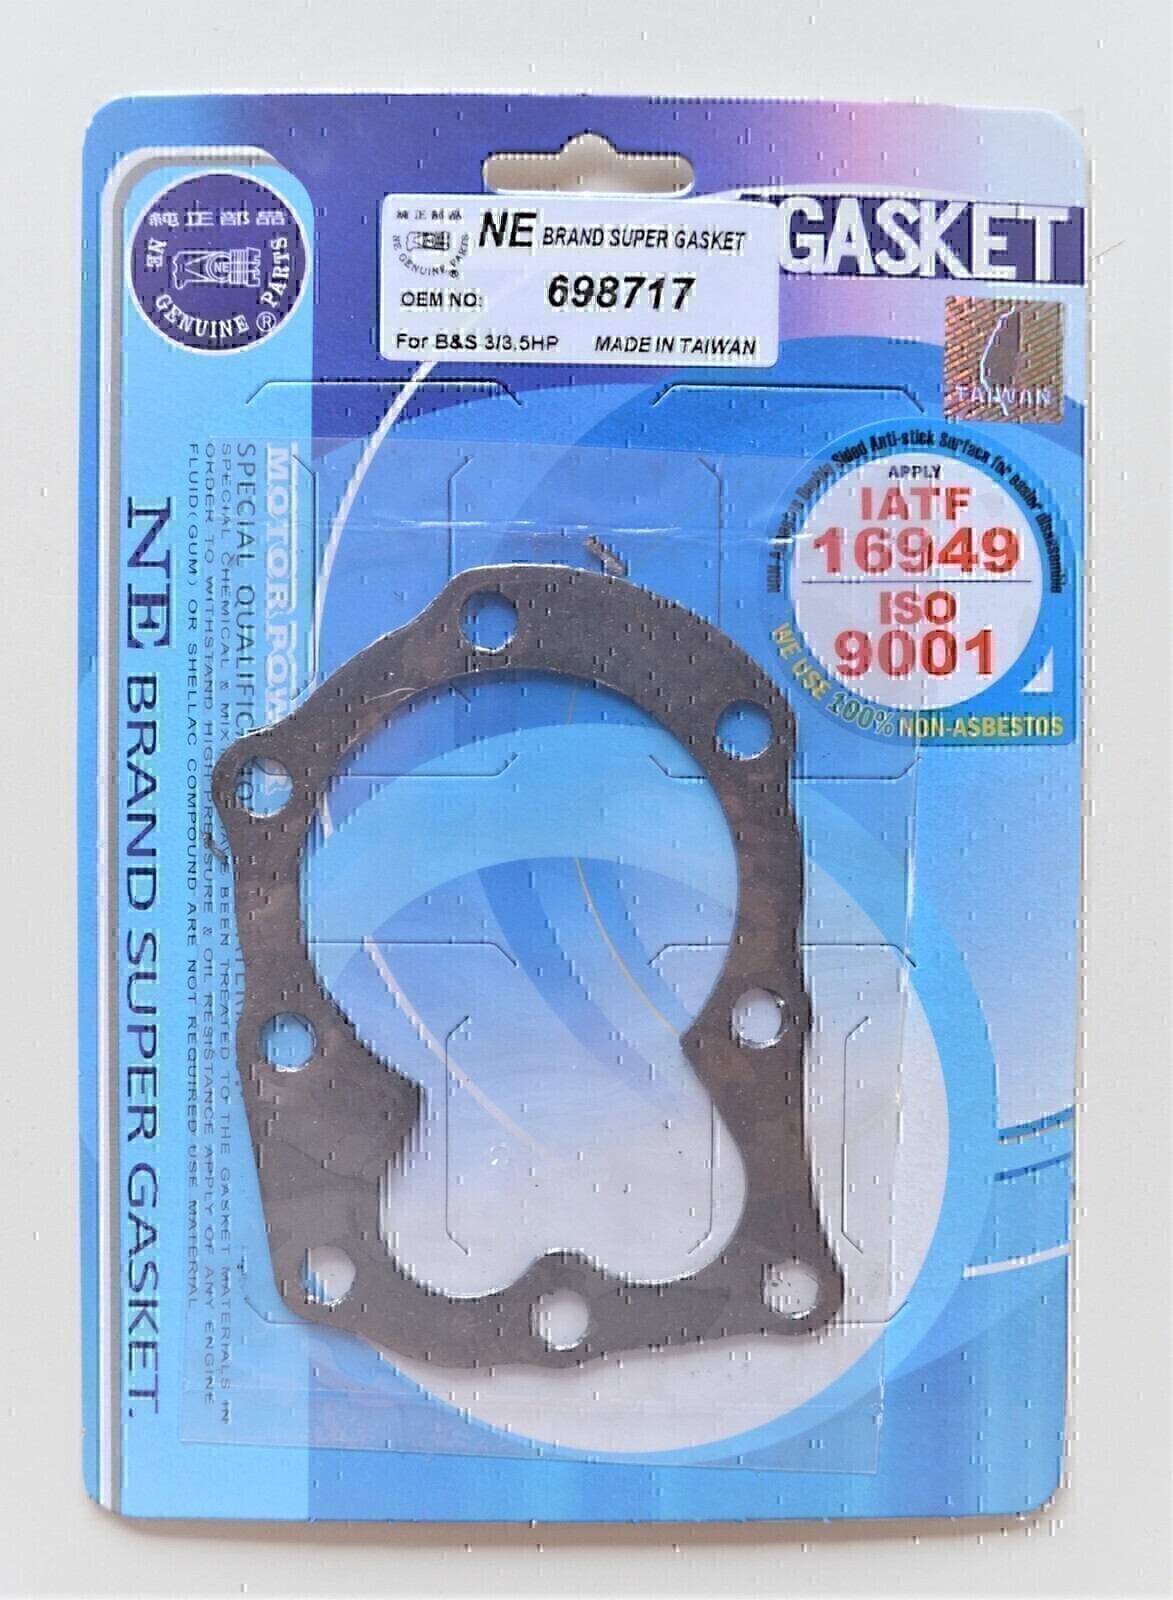 HEAD GASKET FOR 2 HP TO 3.5 HP BRIGGS & STRATTON MOTORS # 698717